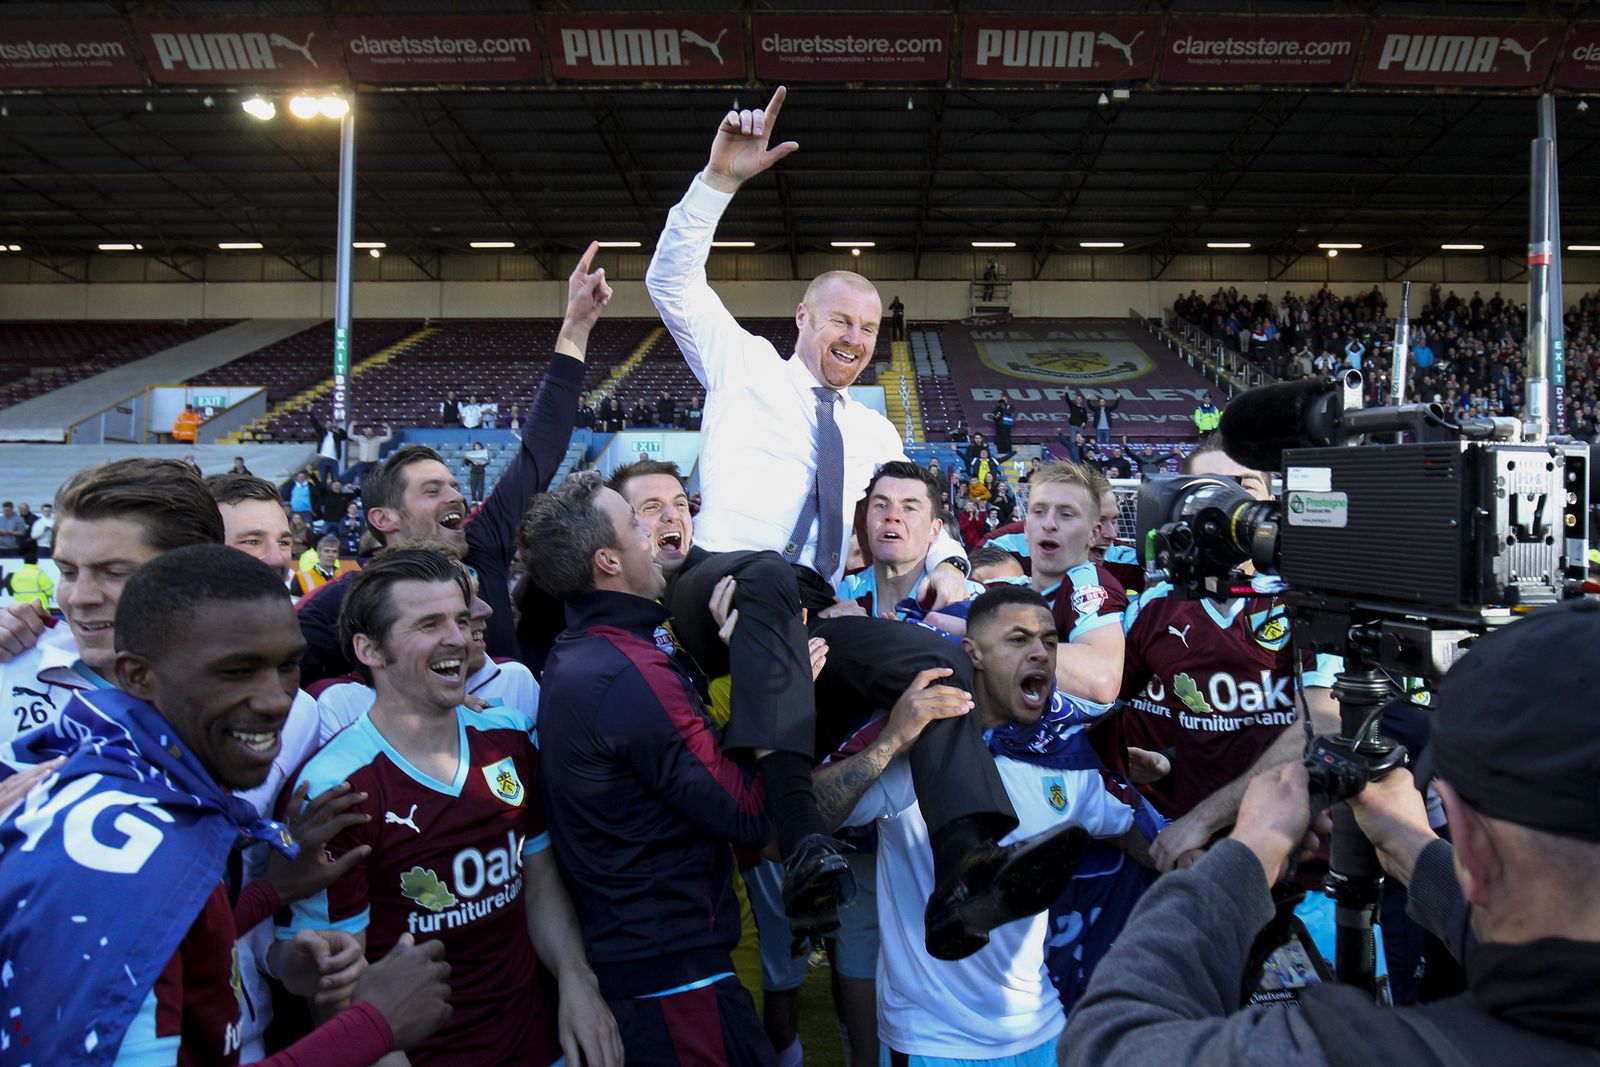 Sean Dyche celebrates Burnley’s promotion to the Premier League. Steadycam doing their usual best to block photographers. (17mm, ISO1600, 1/800th, f4)